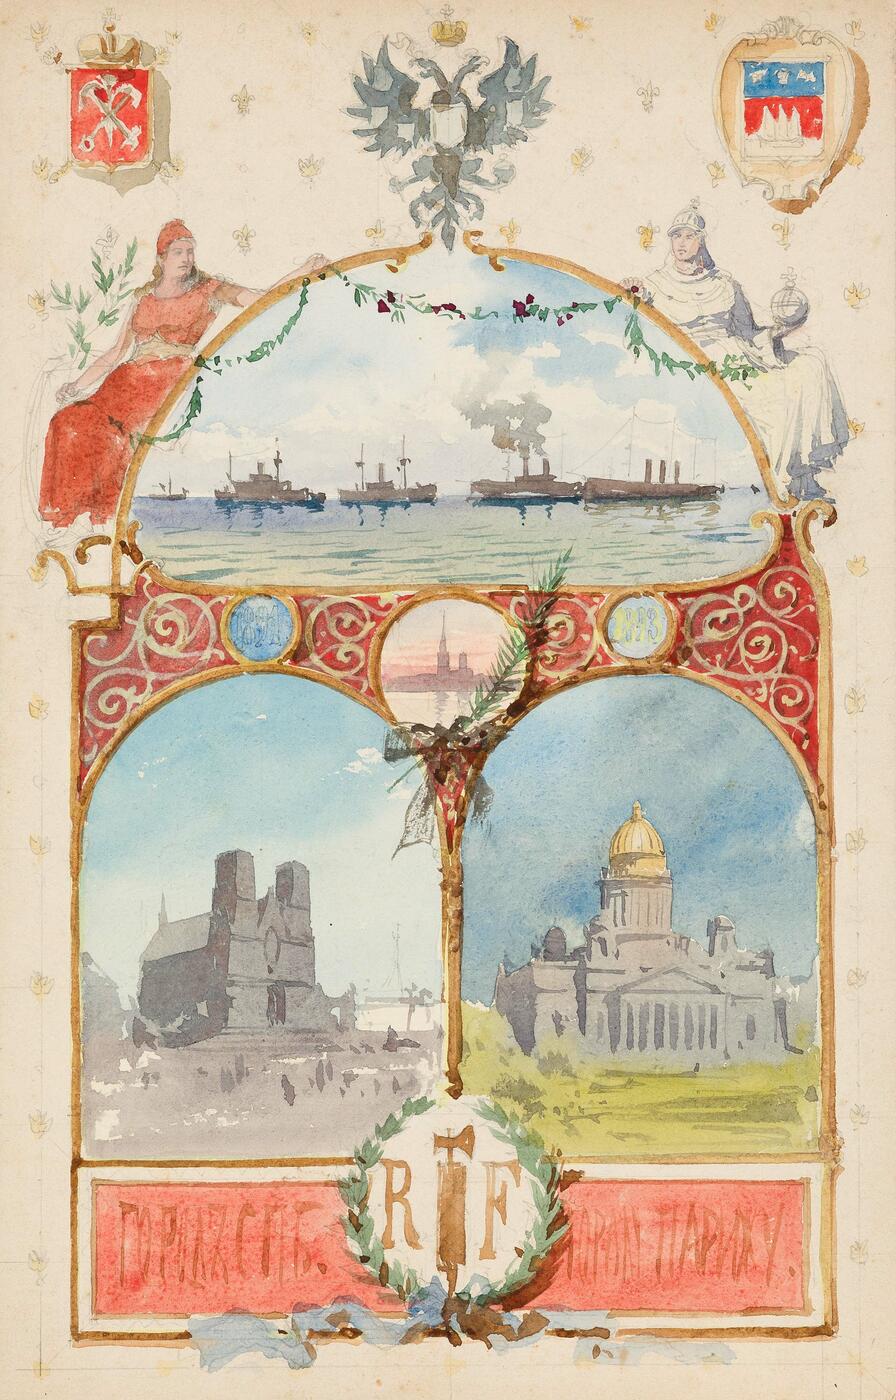 Illustration "From the City of St Petersburg to the City of Paris"